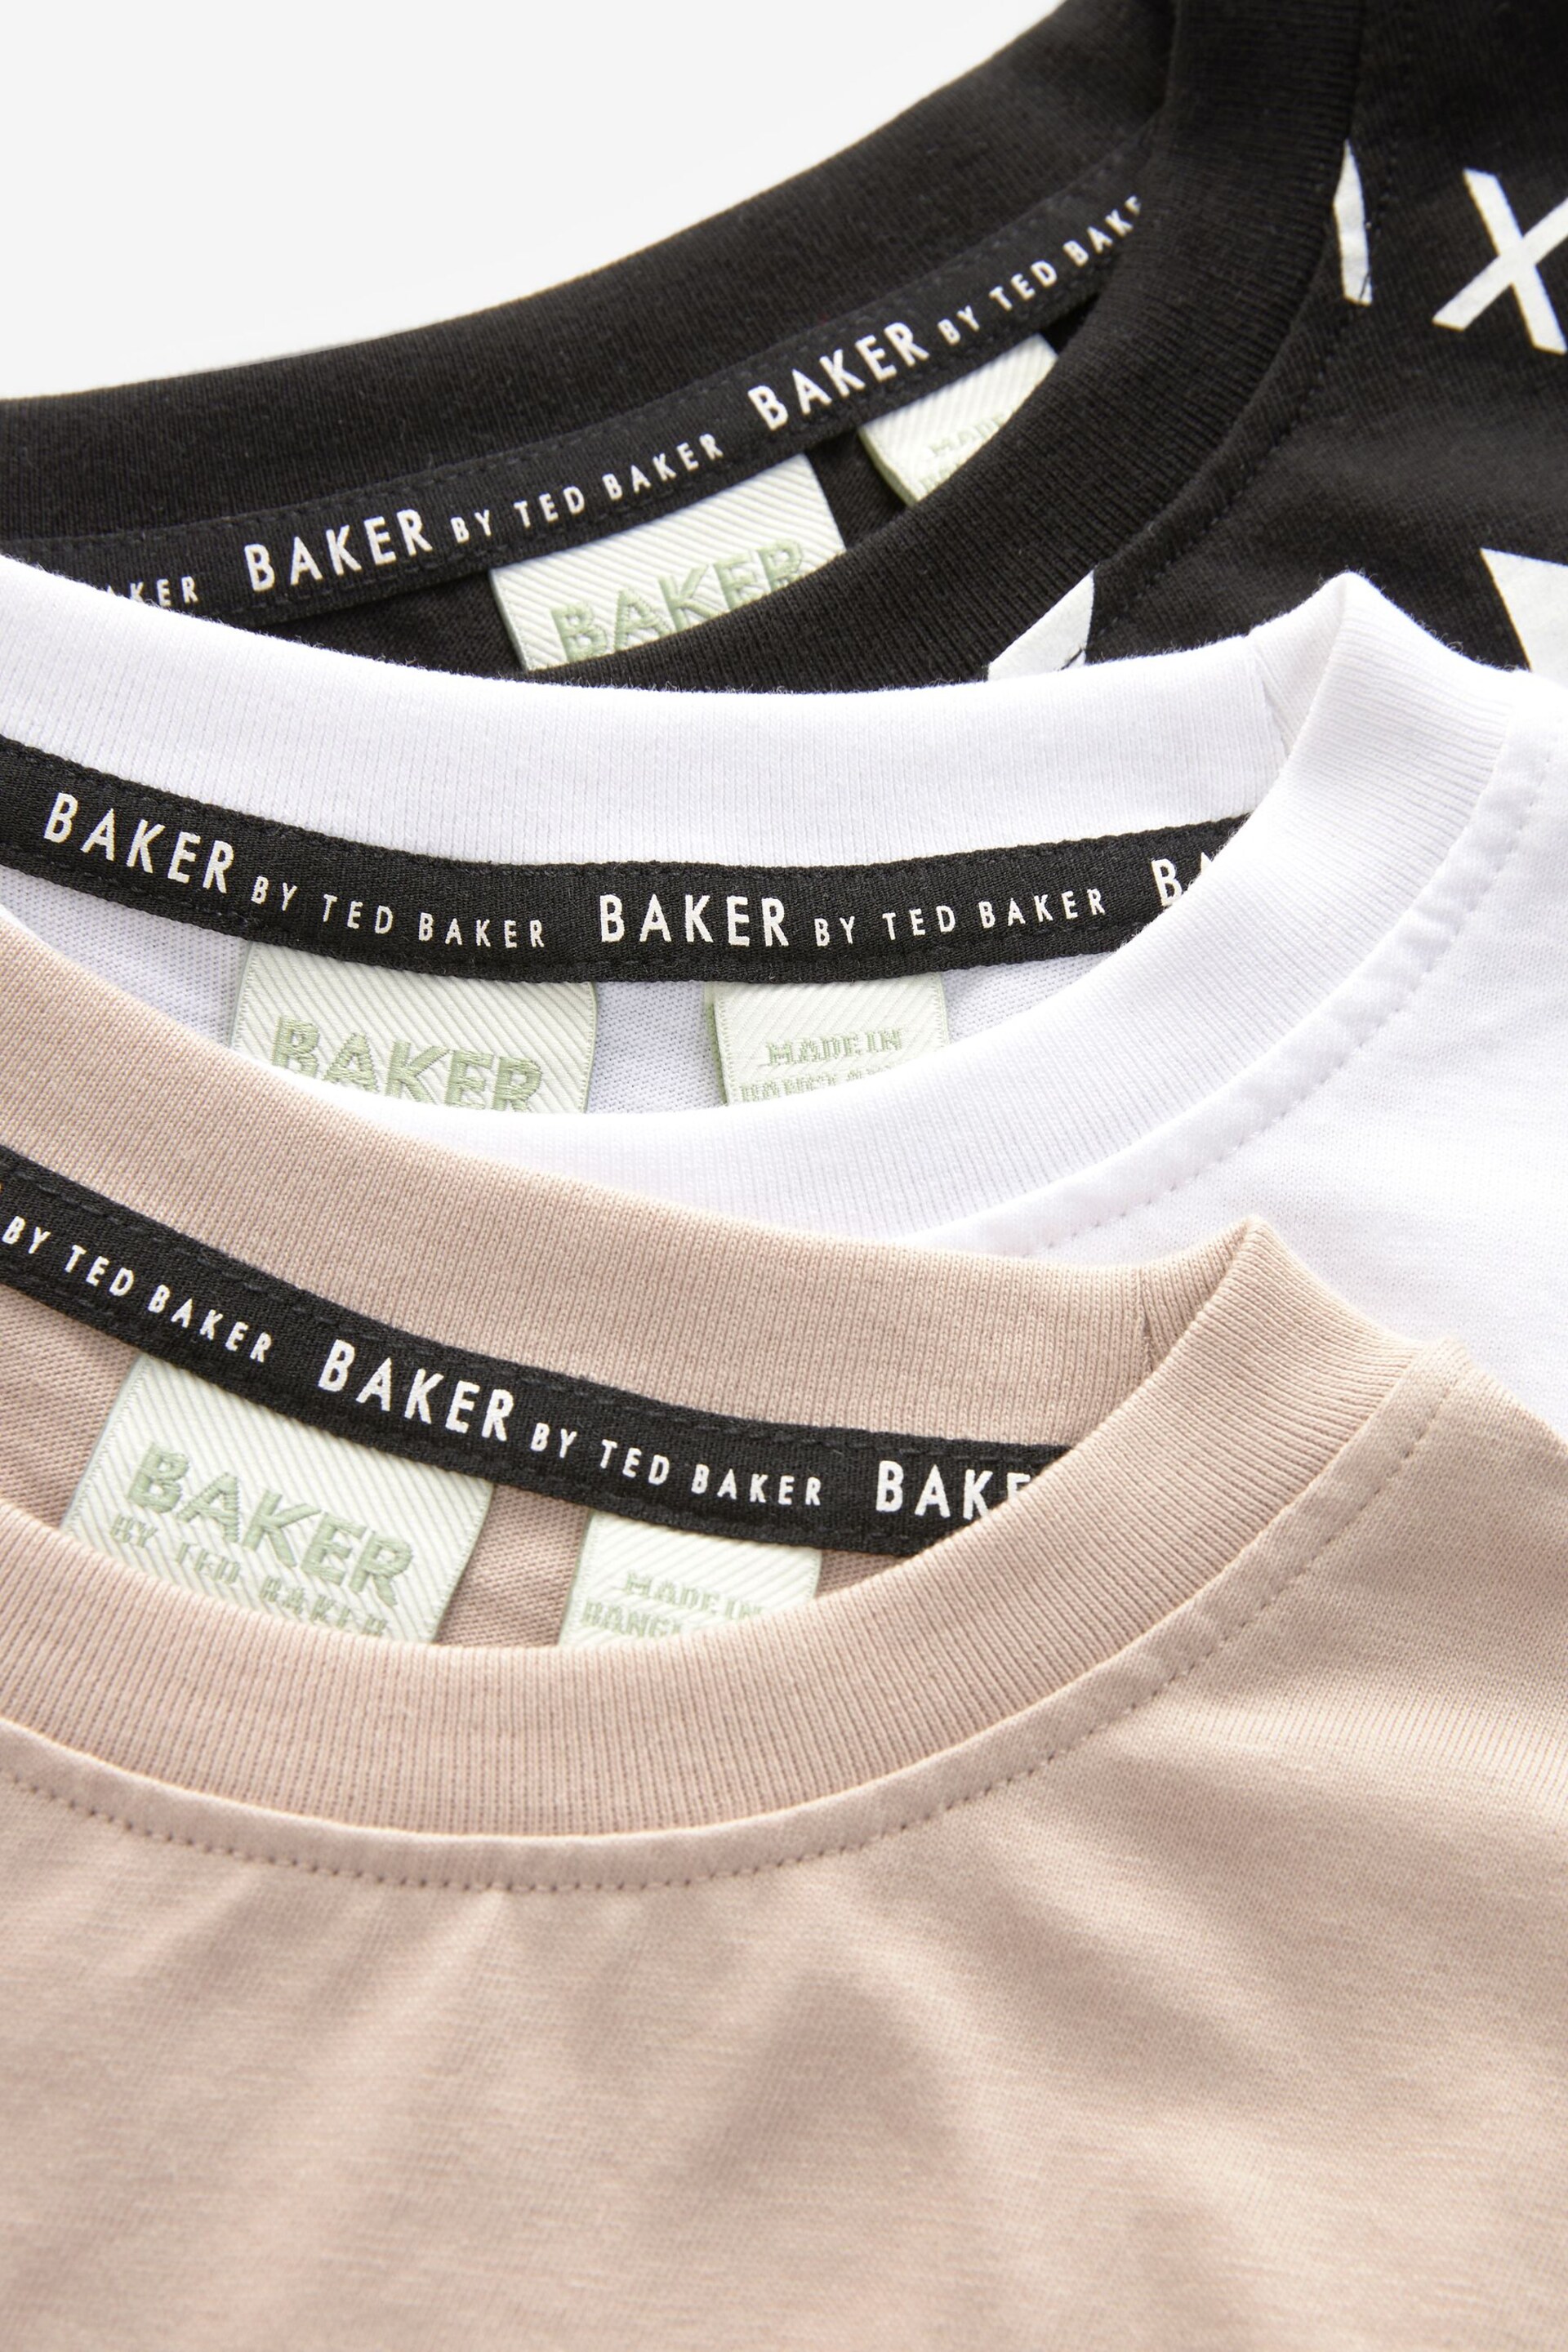 Baker by Ted Baker Graphic T-Shirts 3 Pack - Image 7 of 7